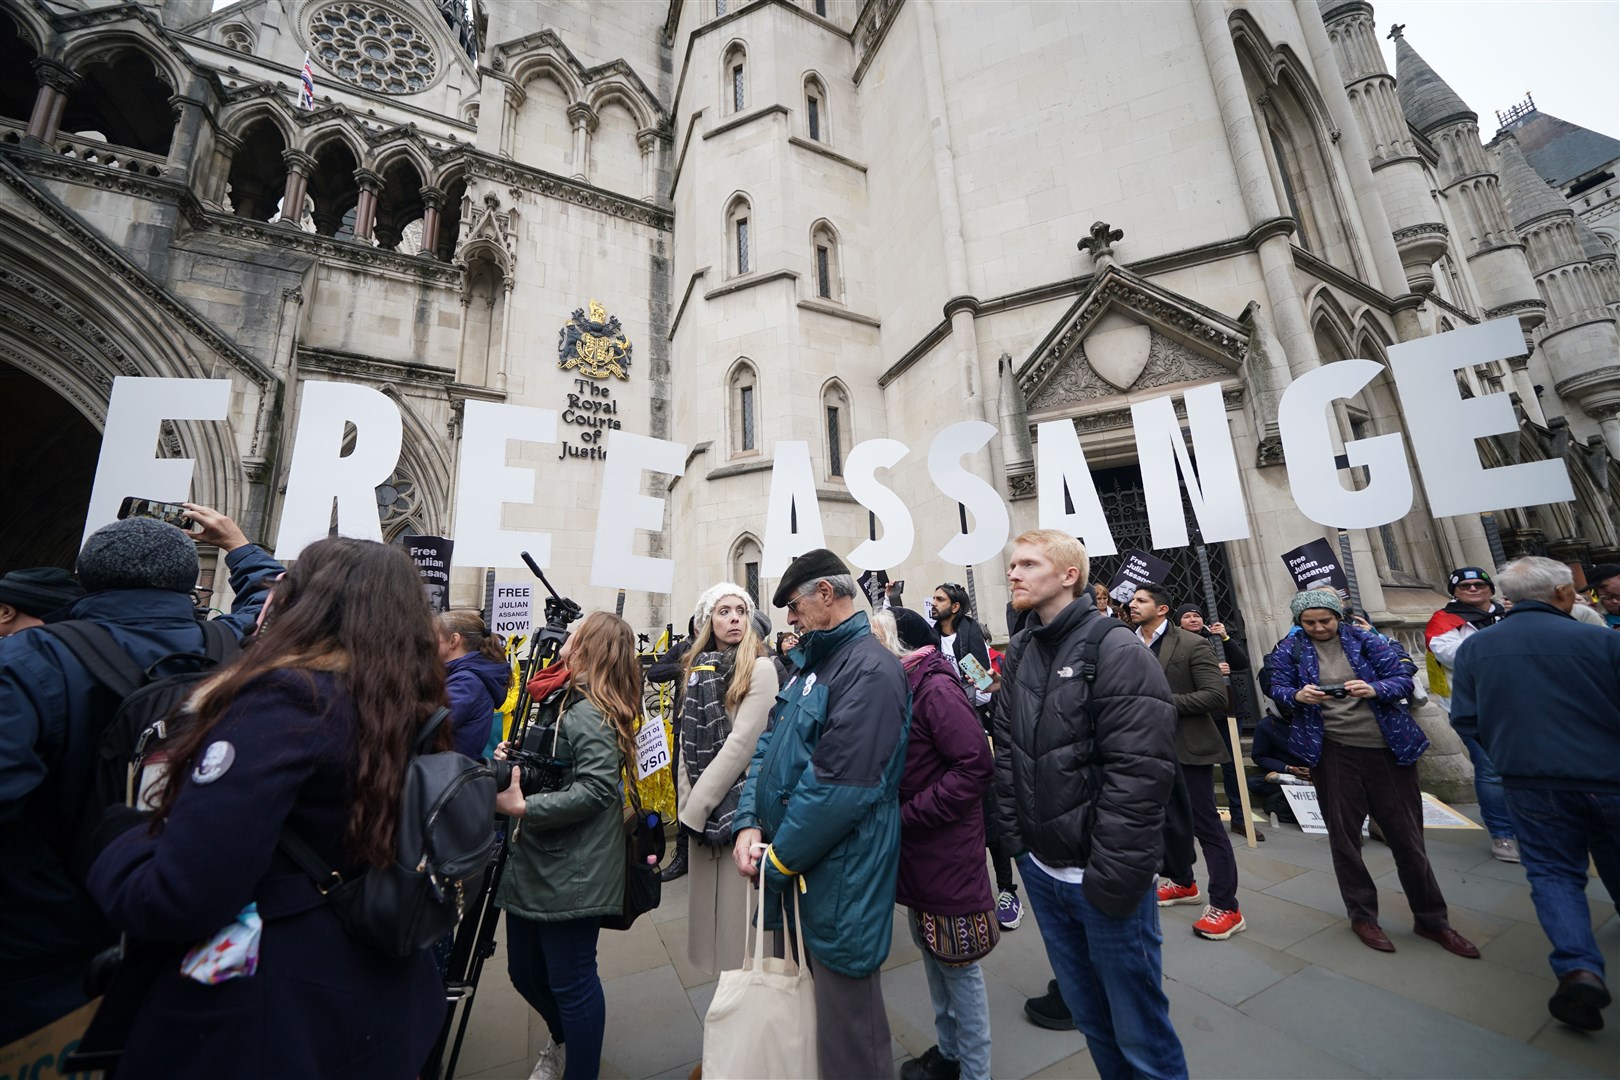 Supporters outside the Royal Courts of Justice in London, during the two-day hearing in the extradition case of WikiLeaks founder Julian Assange (Yui Mok/PA)